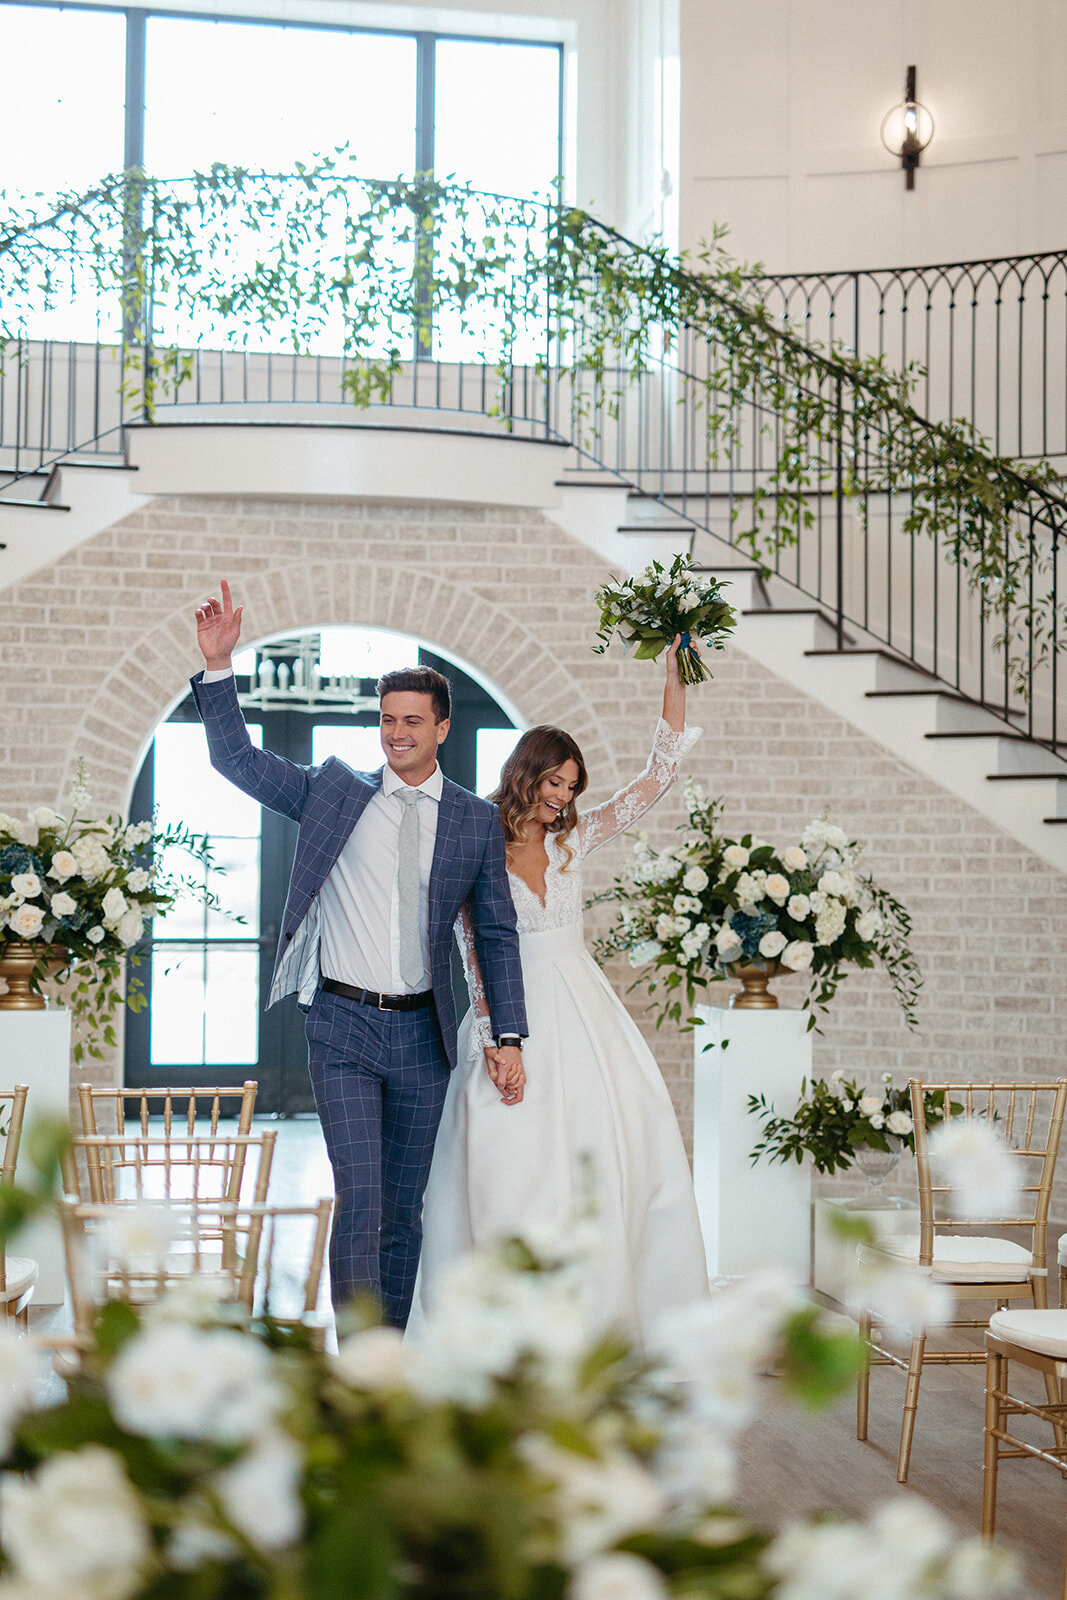 Bride and groom in a blue suit and white wedding gown wave walking down an aisle of gold chairs and white flowers.